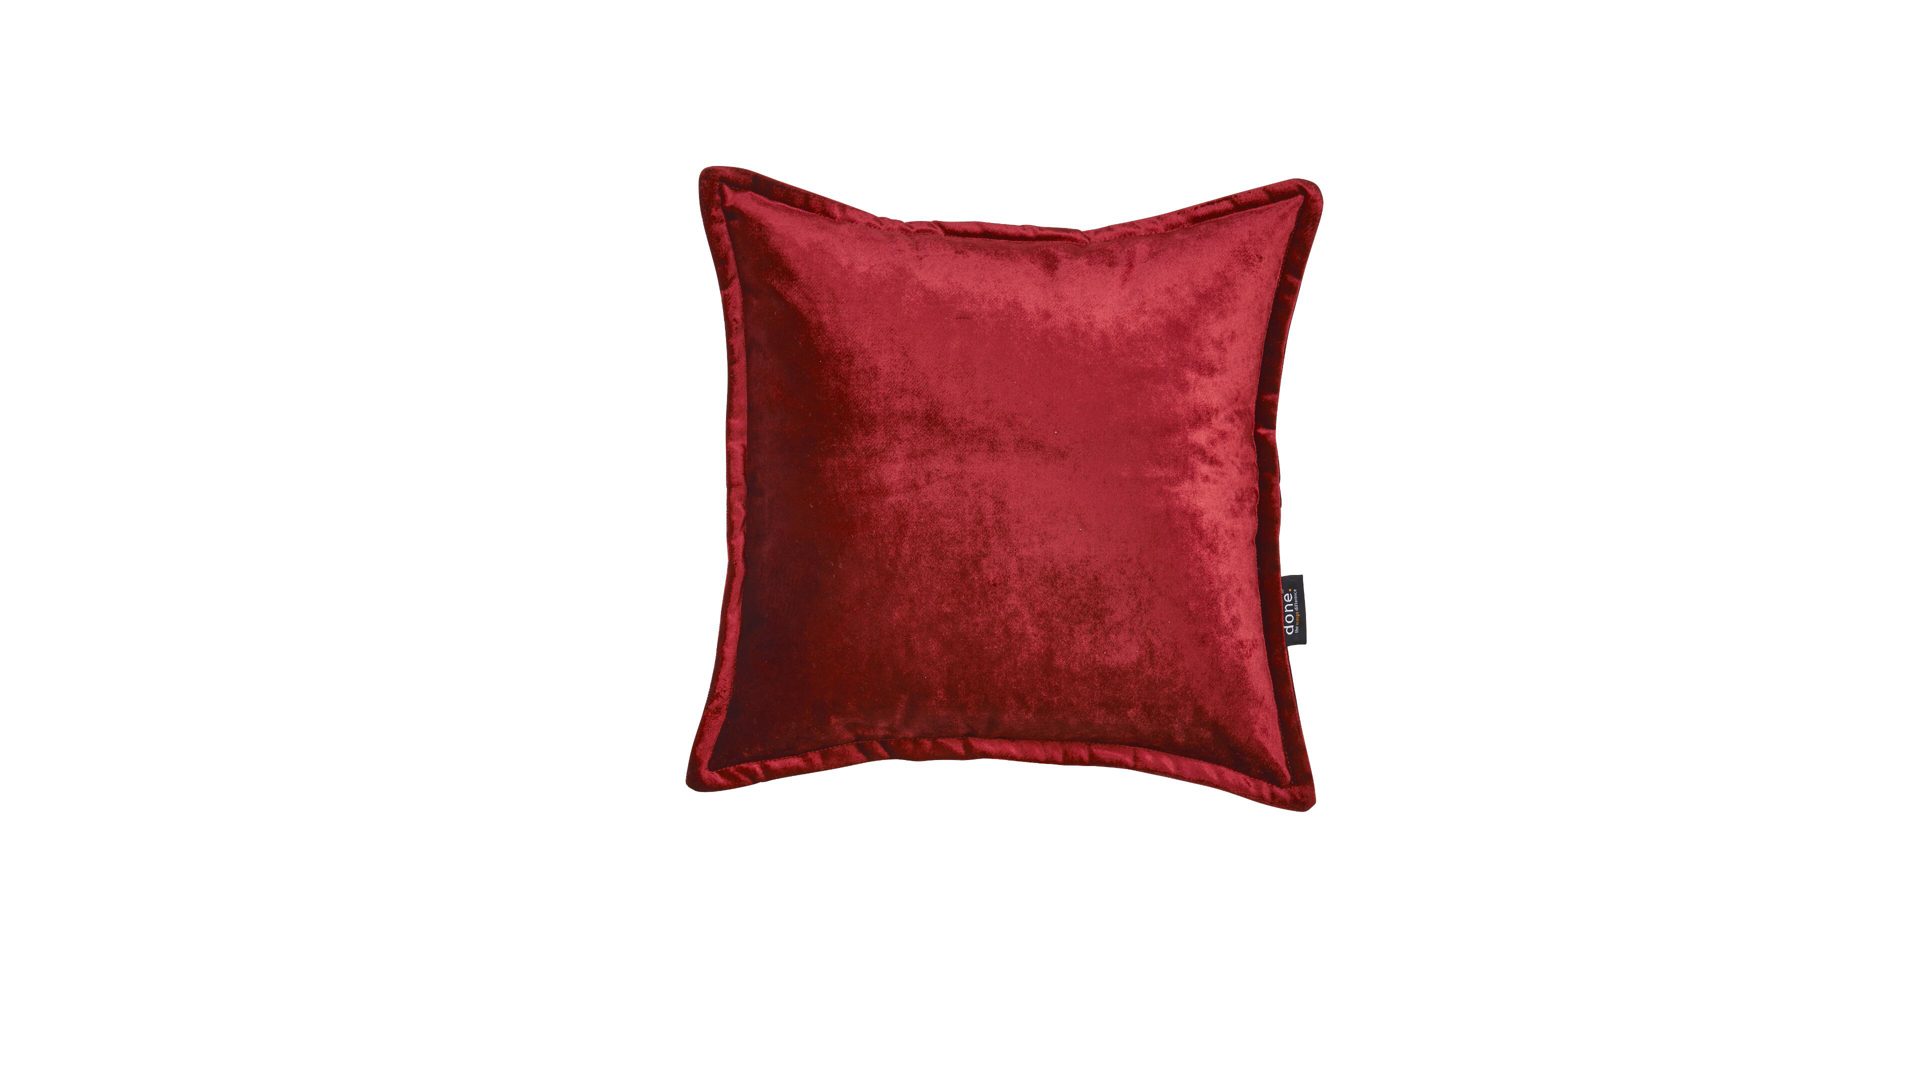 Kissenbezug /-hülle Done® be different aus Stoff in Dunkelrot DONE® Kissenhülle Cushion Glam roter Samt – ca. 45 x 45 cm